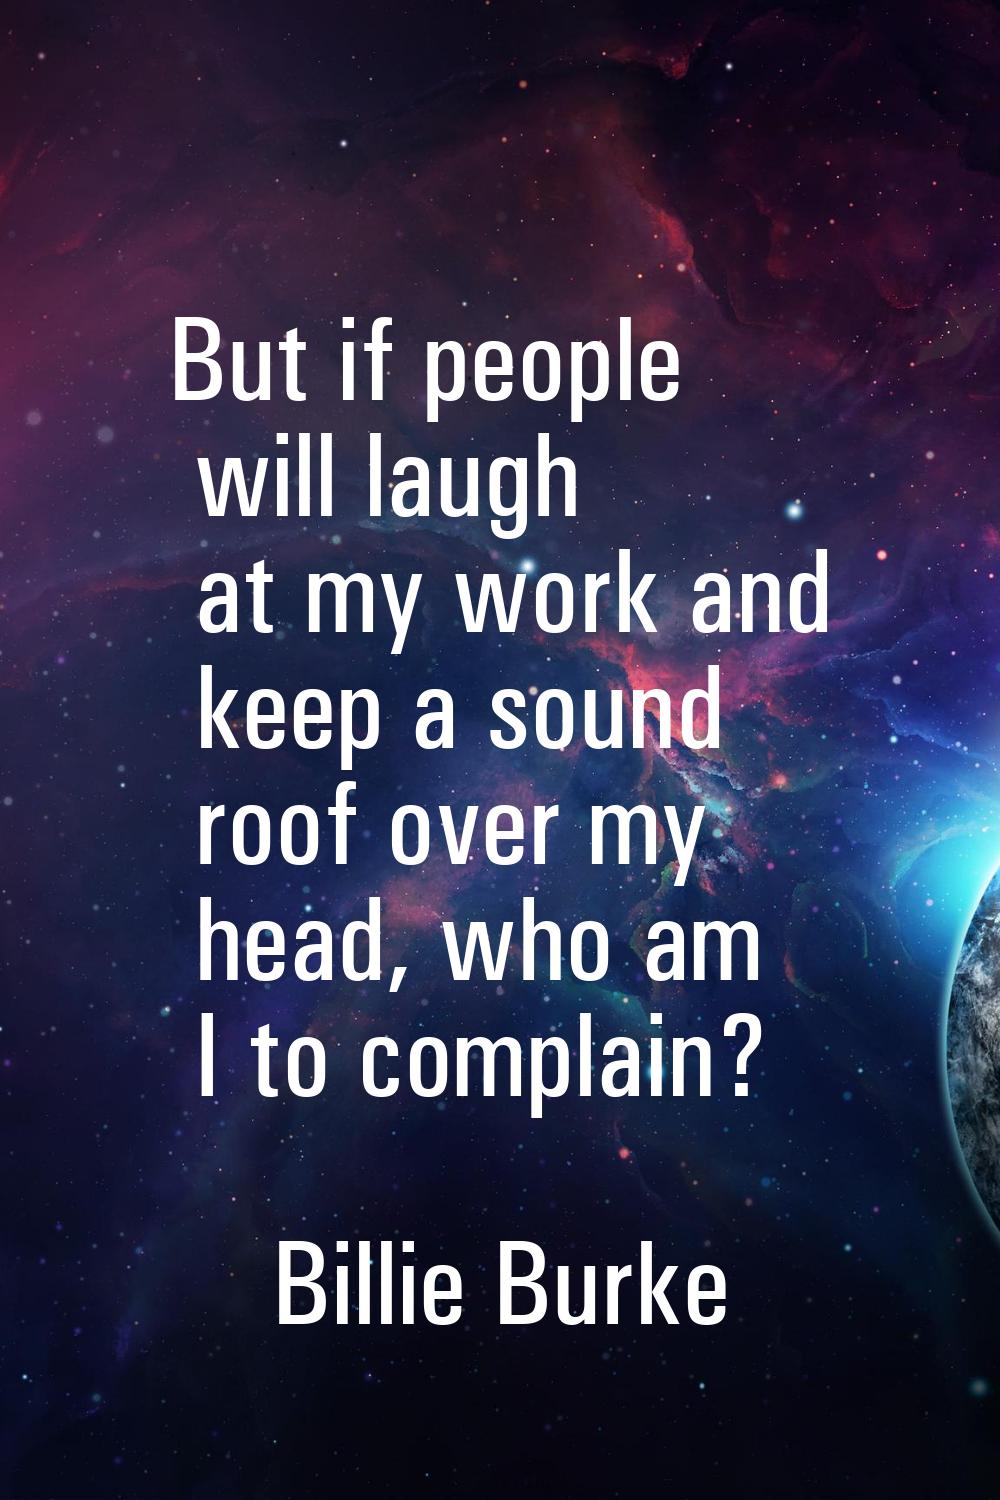 But if people will laugh at my work and keep a sound roof over my head, who am I to complain?